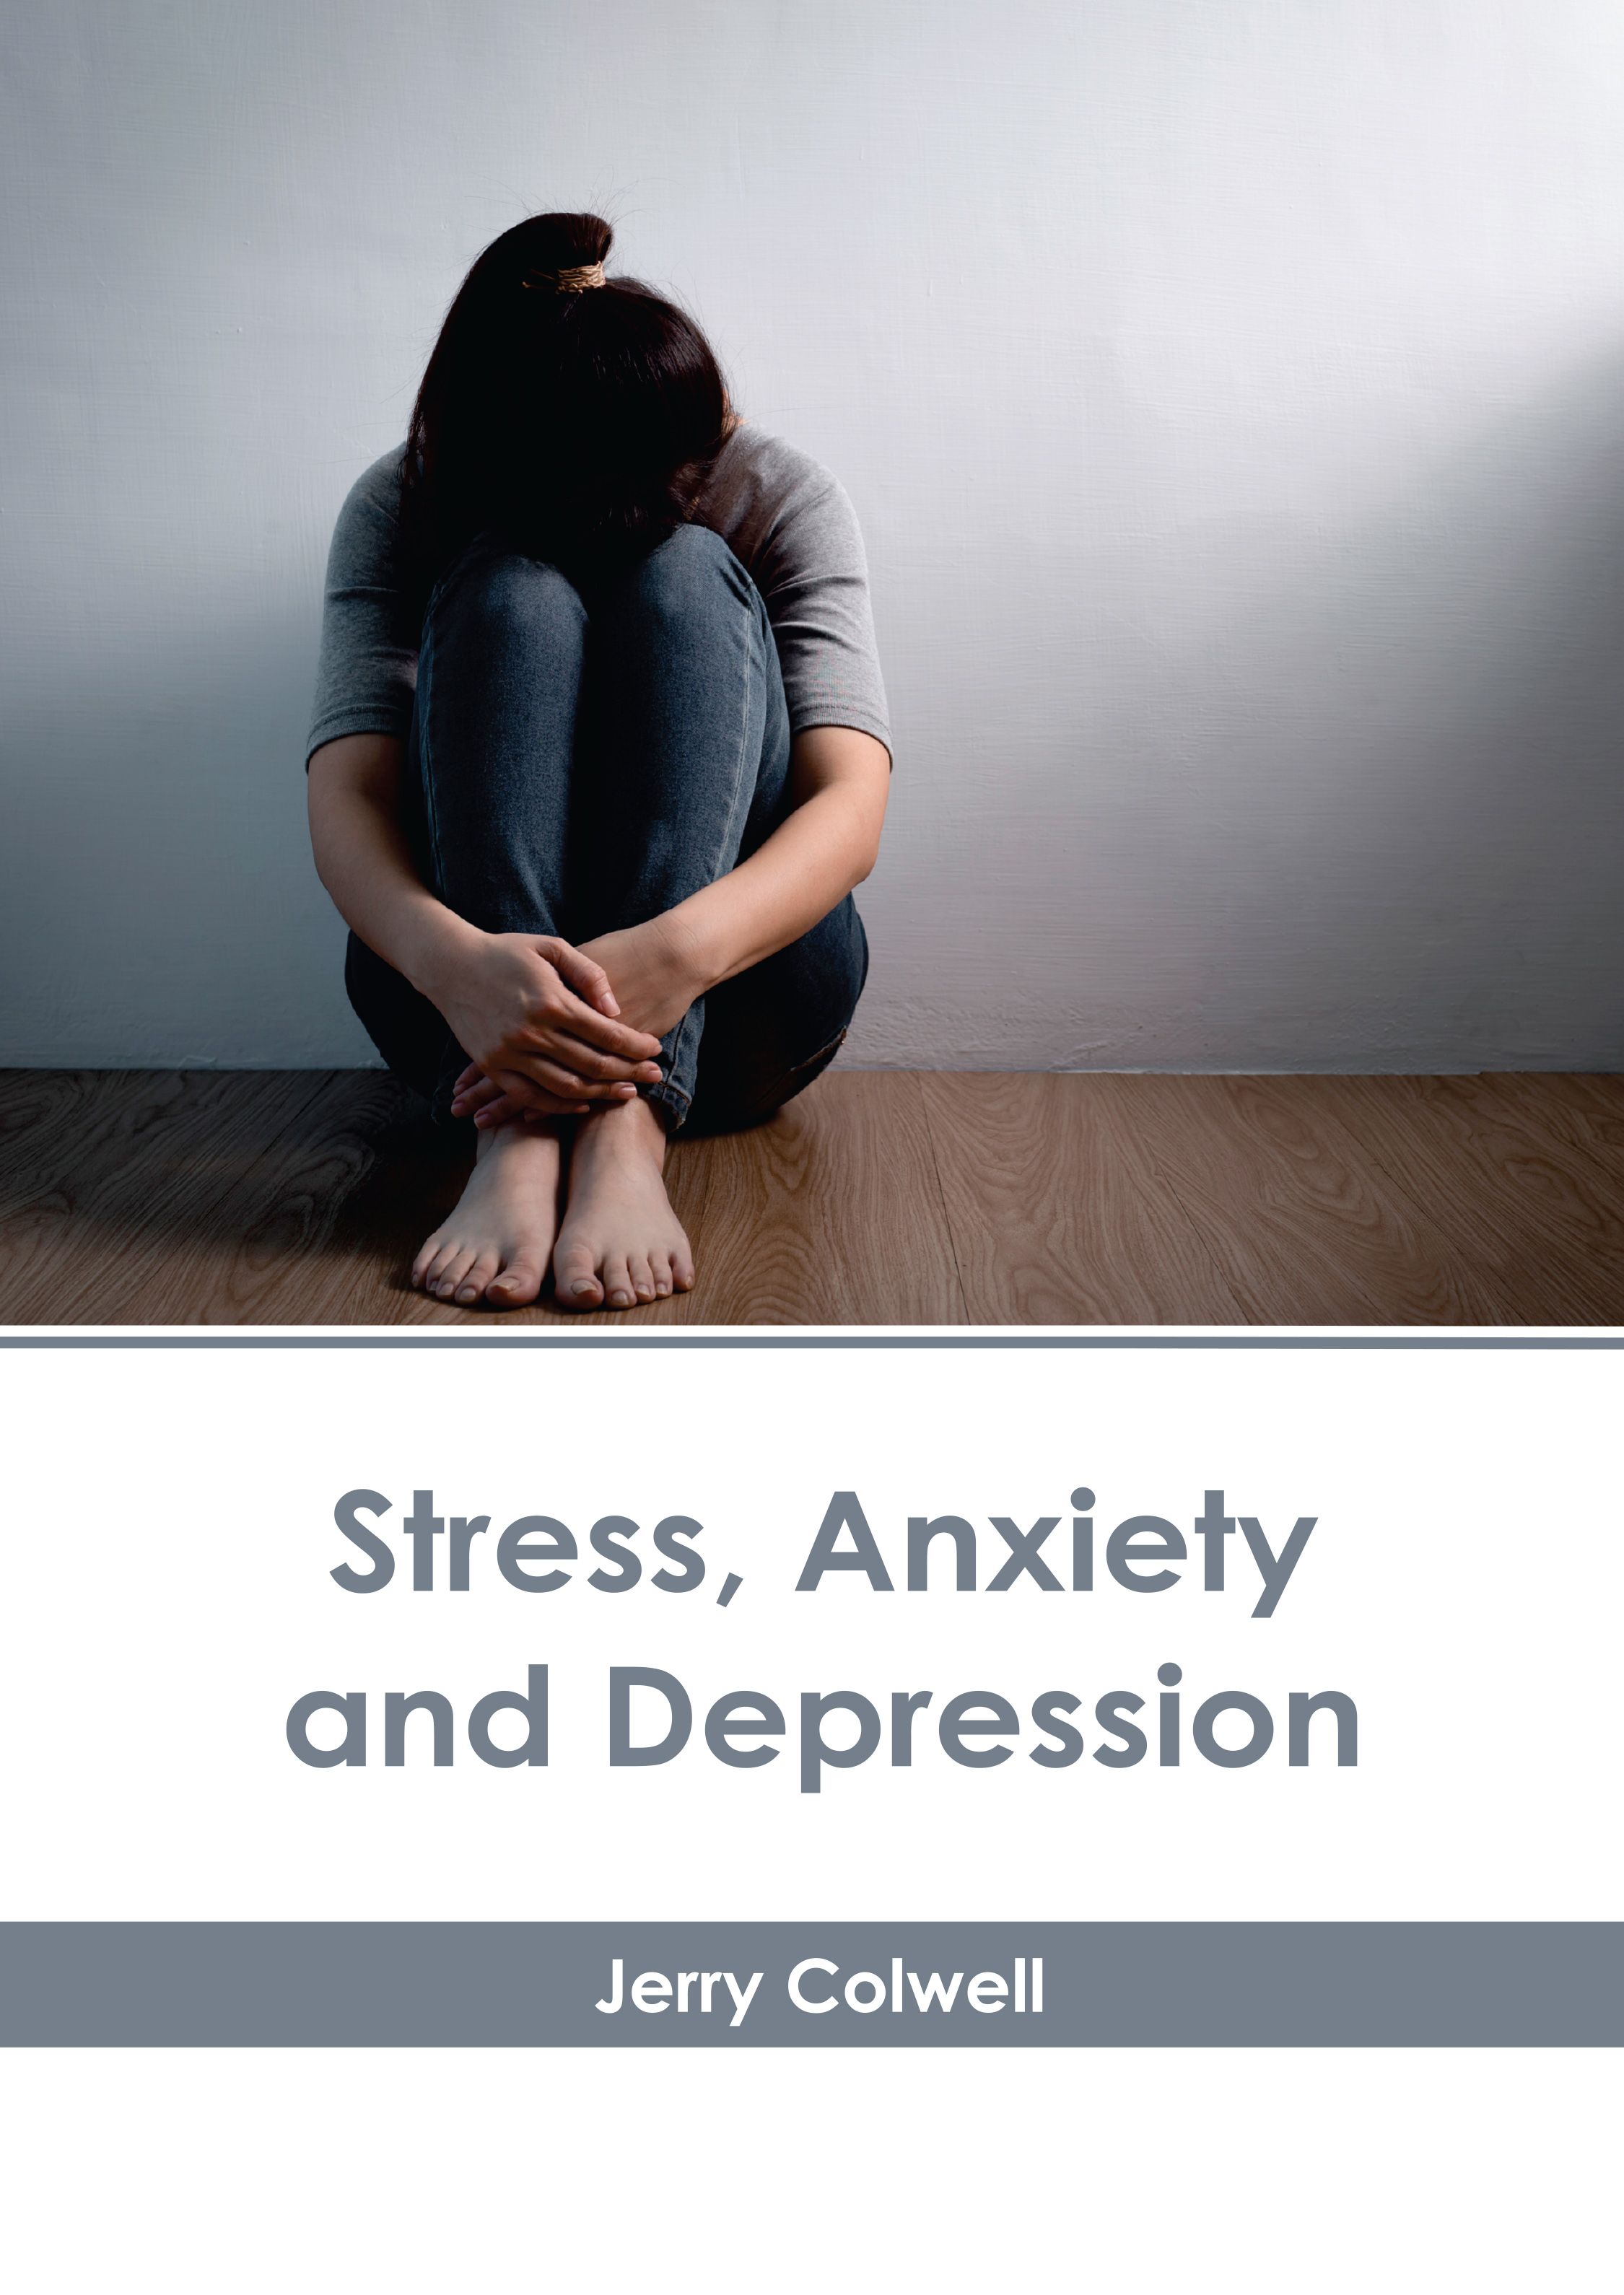 STRESS, ANXIETY AND DEPRESSION